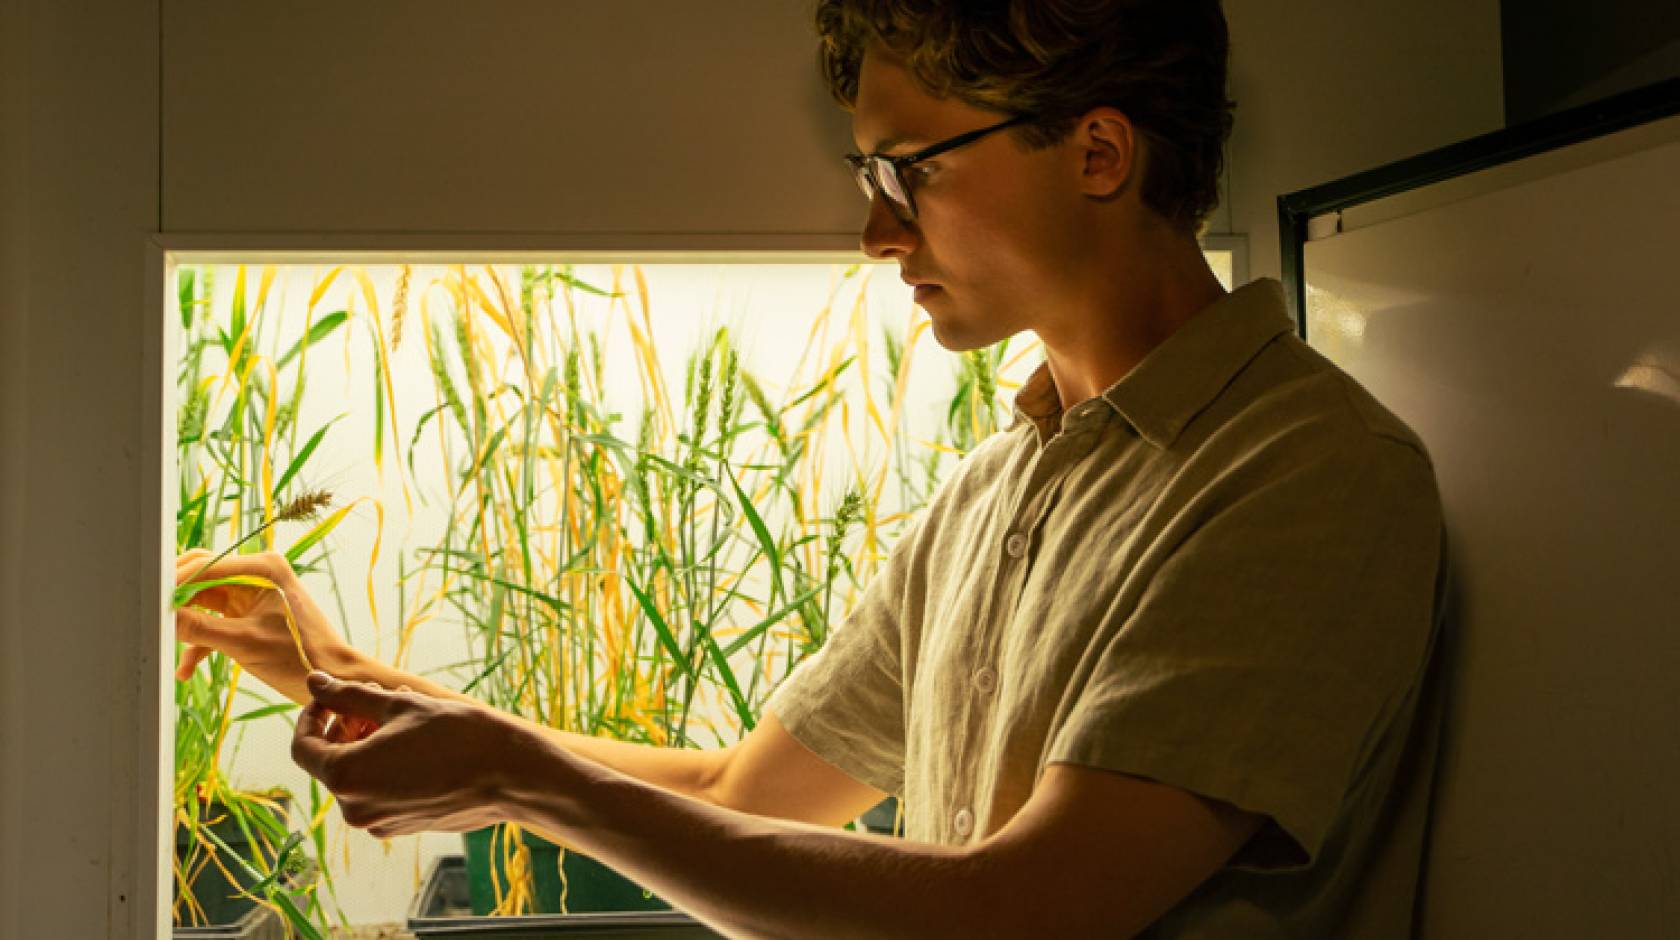 Evan Groover examines a rice plant growing in a brightly lit box